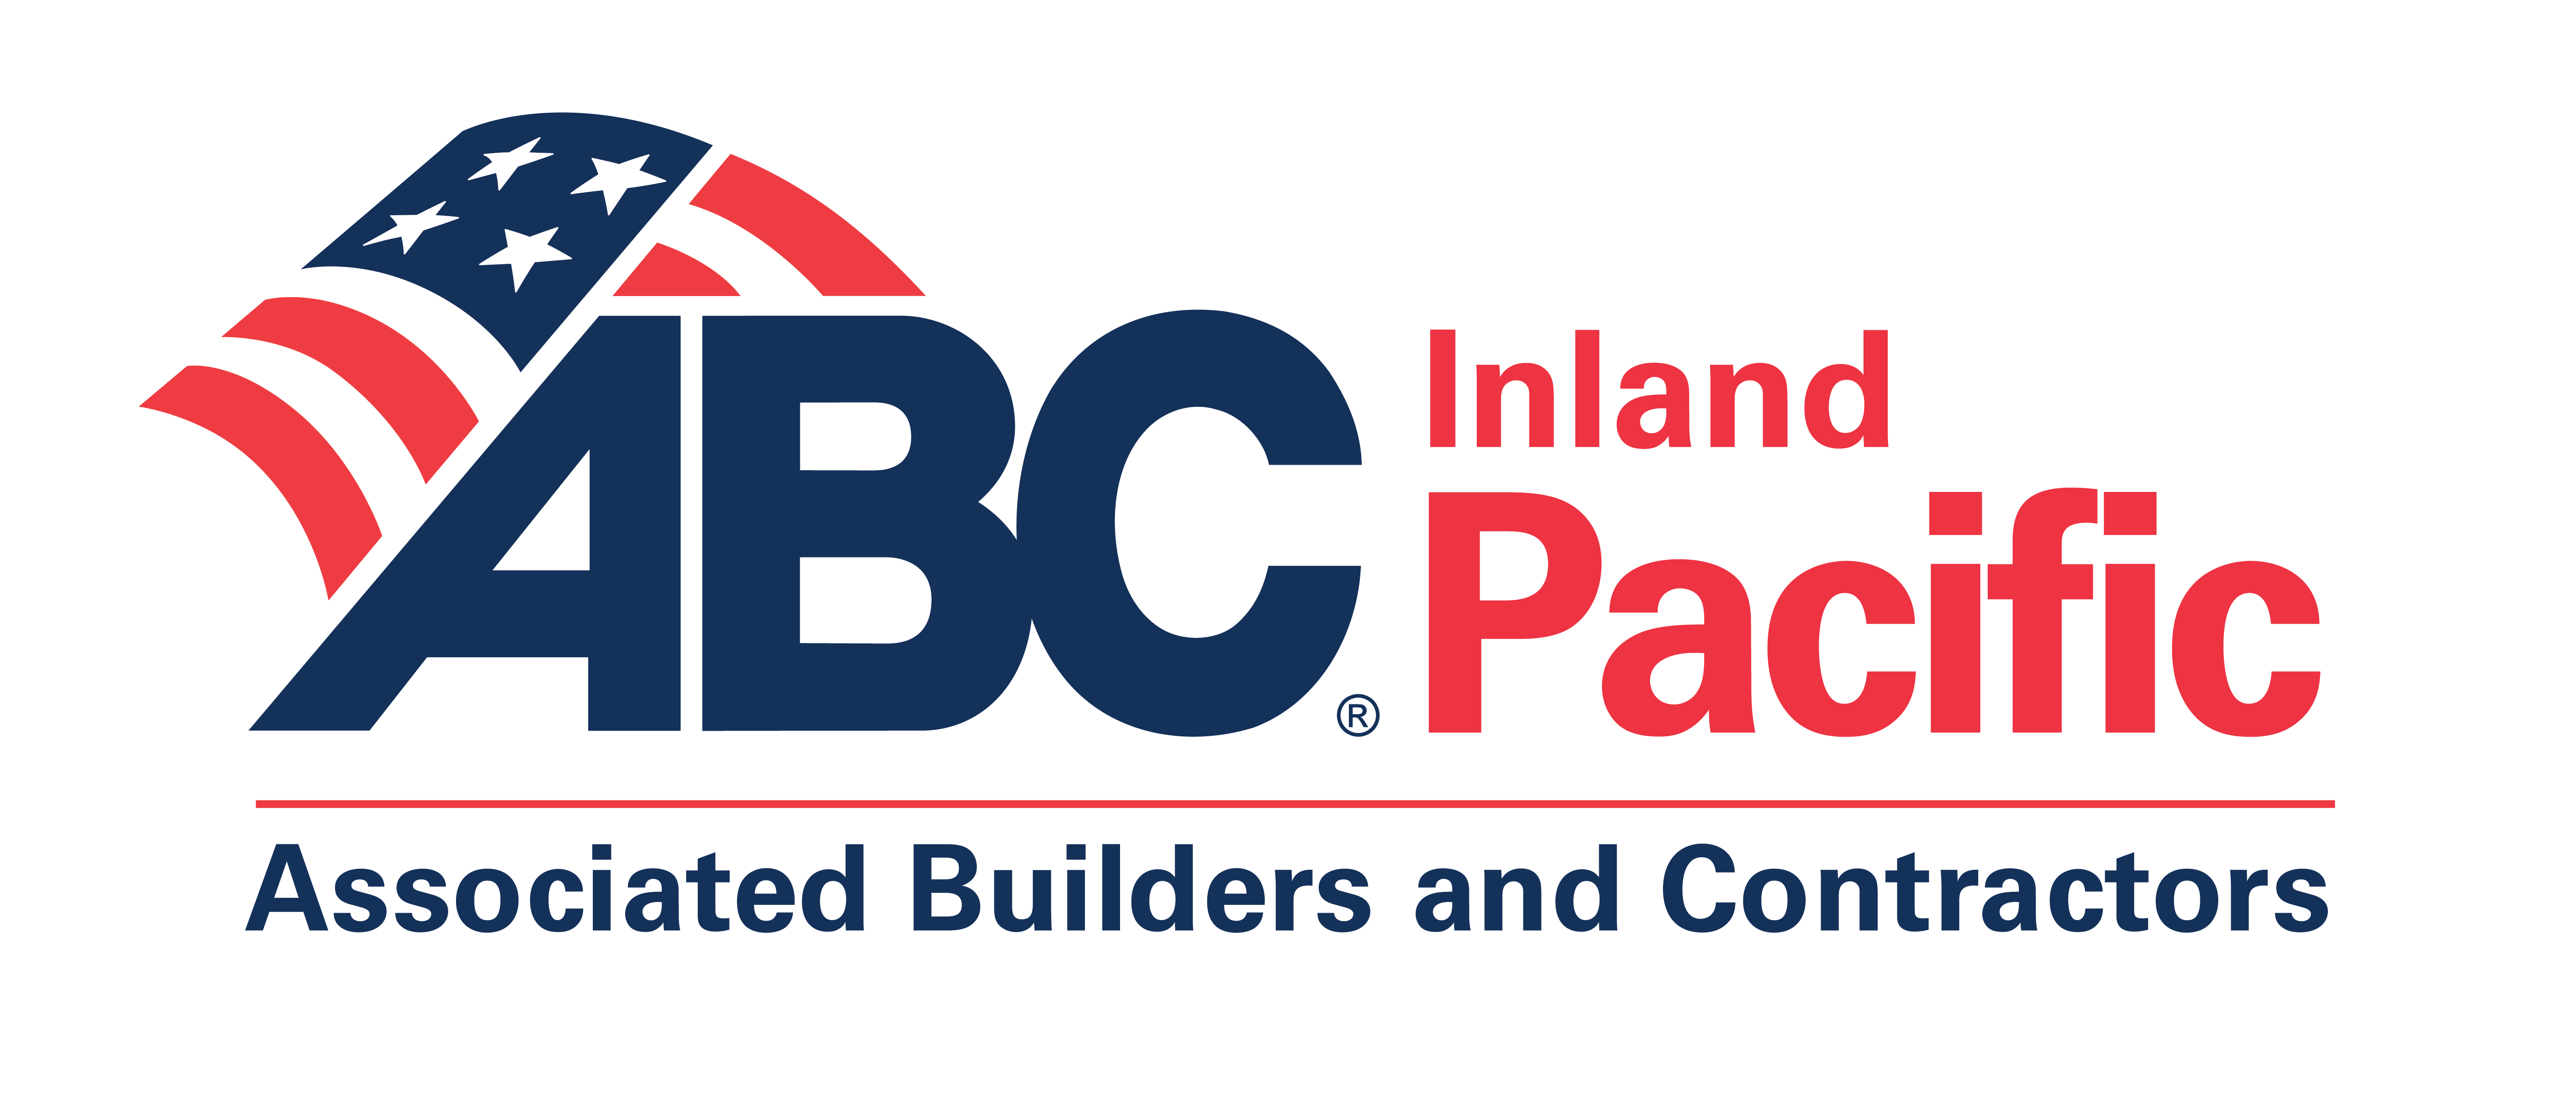 Inland Pacific-03 - Favorite.png